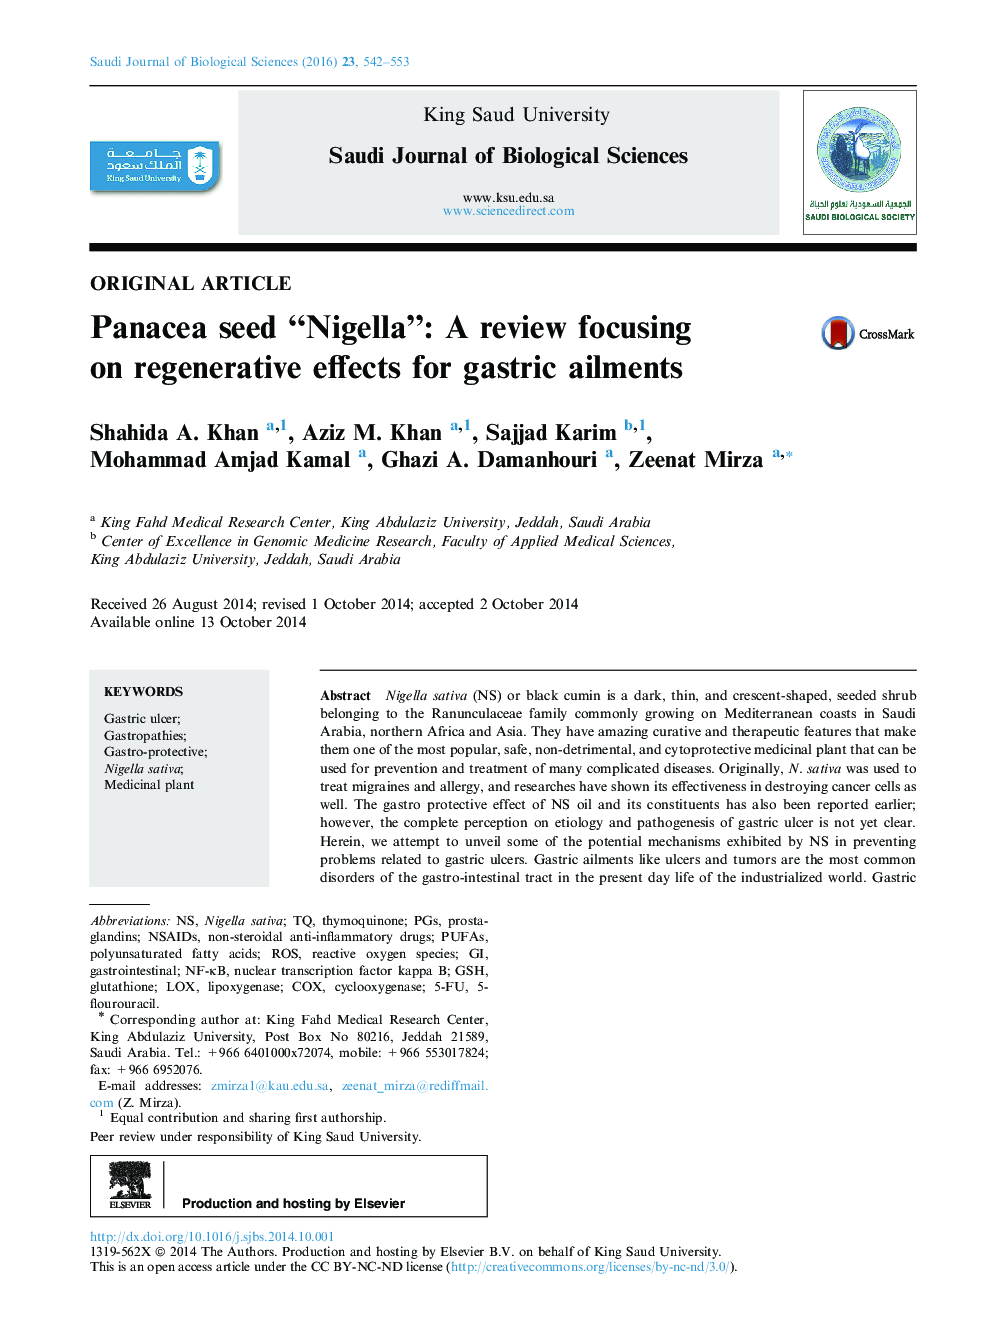 Panacea seed “Nigella”: A review focusing on regenerative effects for gastric ailments 